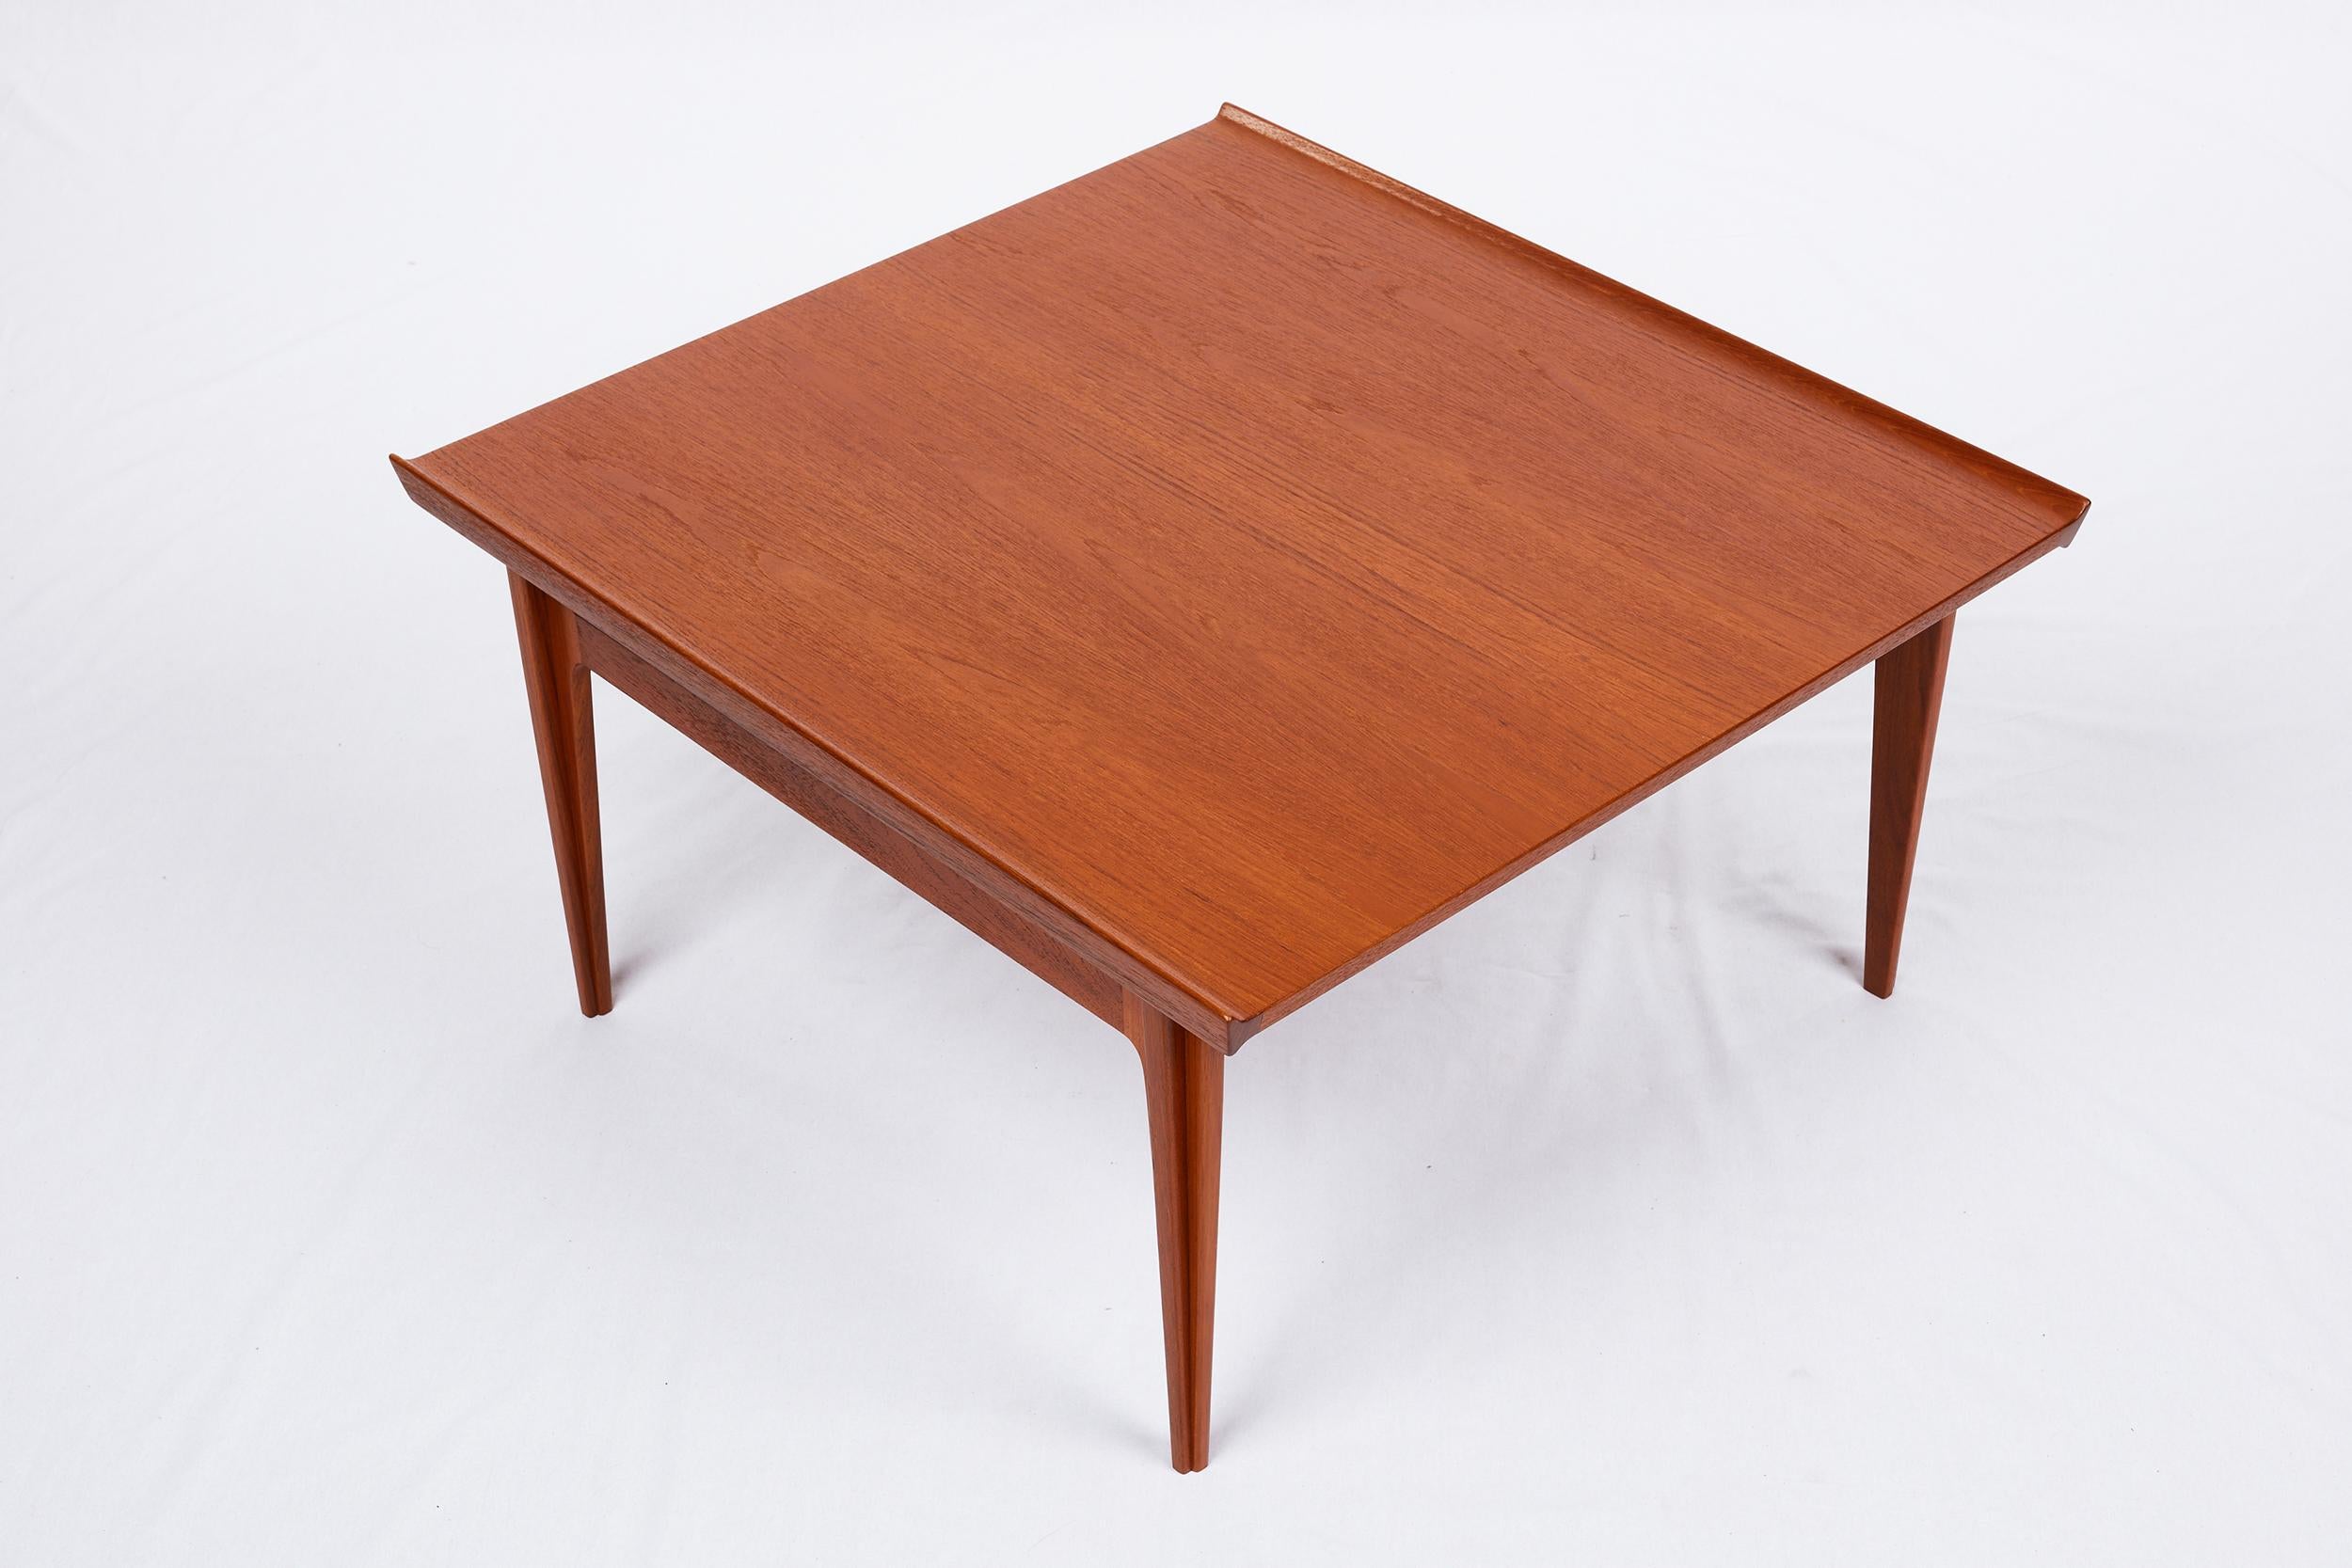 Finn Juhl teak coffee table. Produced by France & Son. Wood has been refinished.